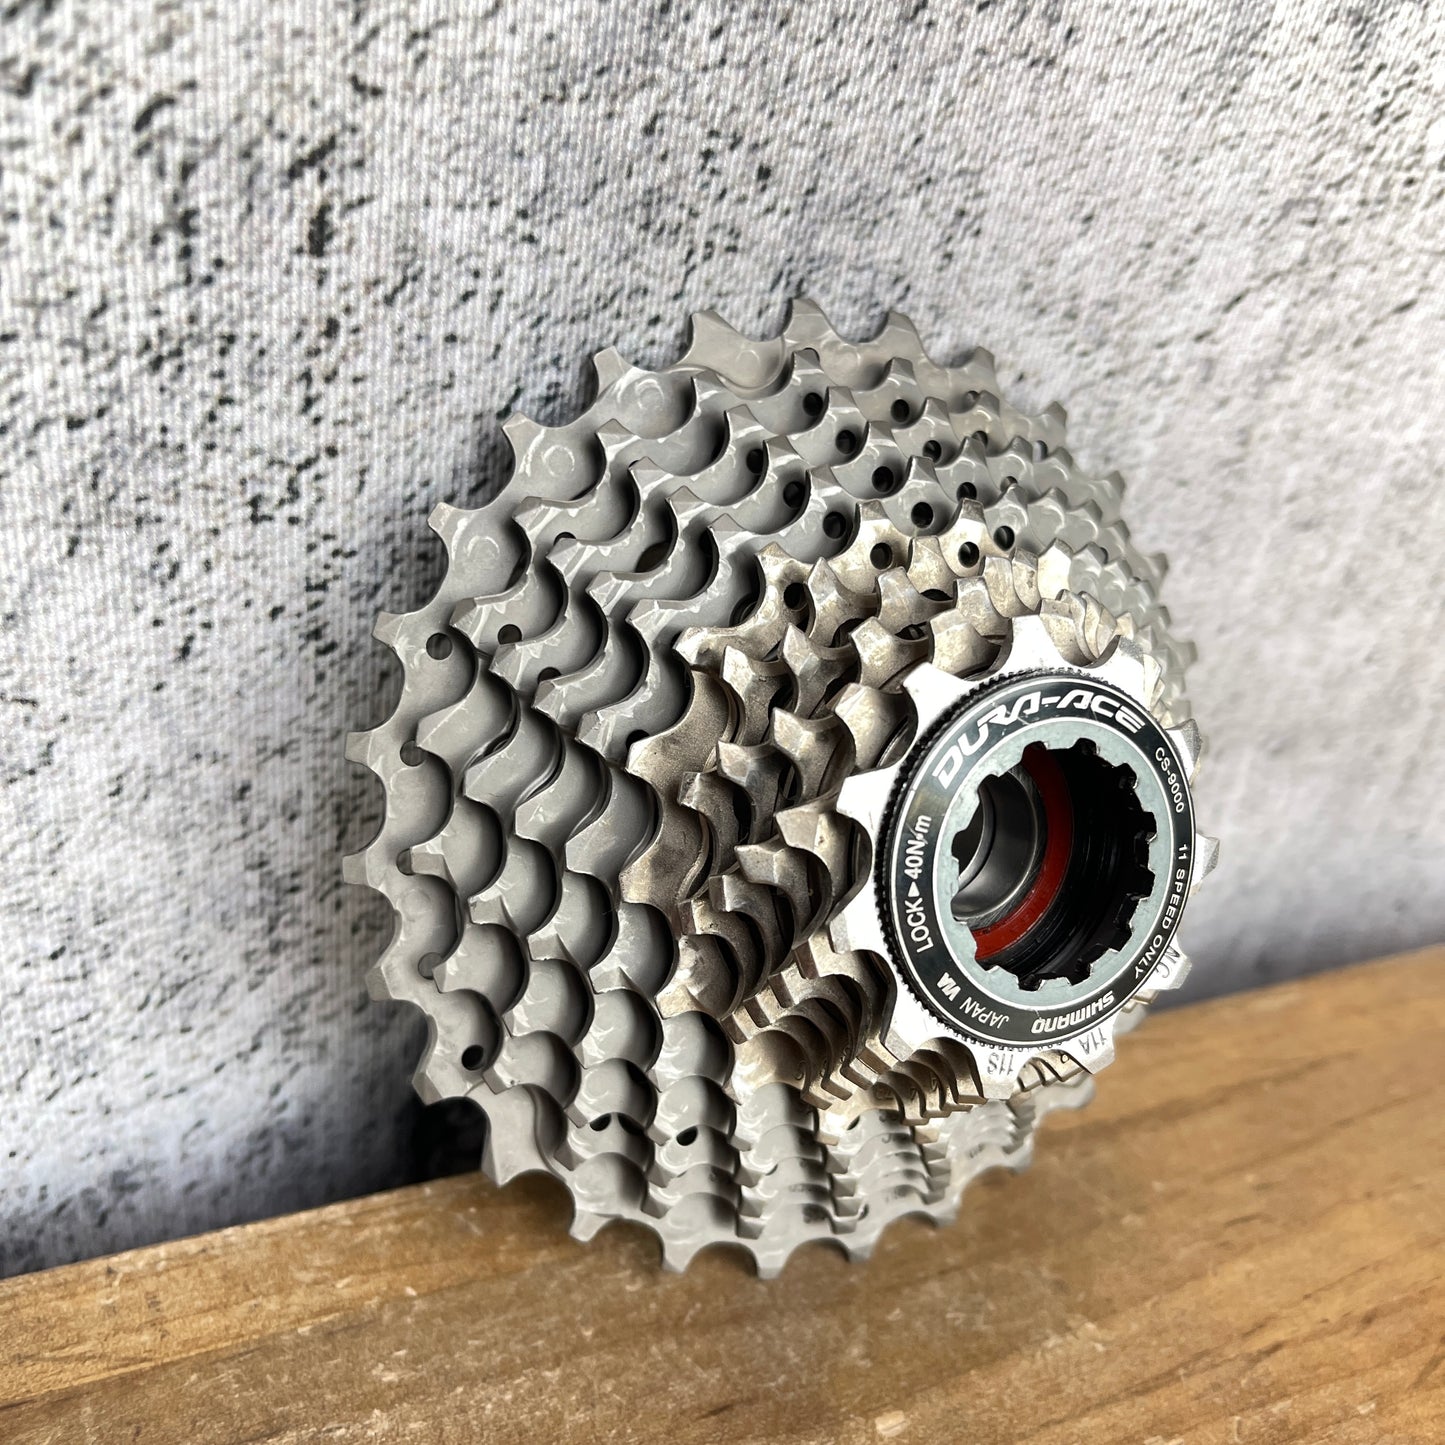 Shimano Dura-Ace CS-R9100 11-28t Cassette "Typical wear" Condition 11-Speed